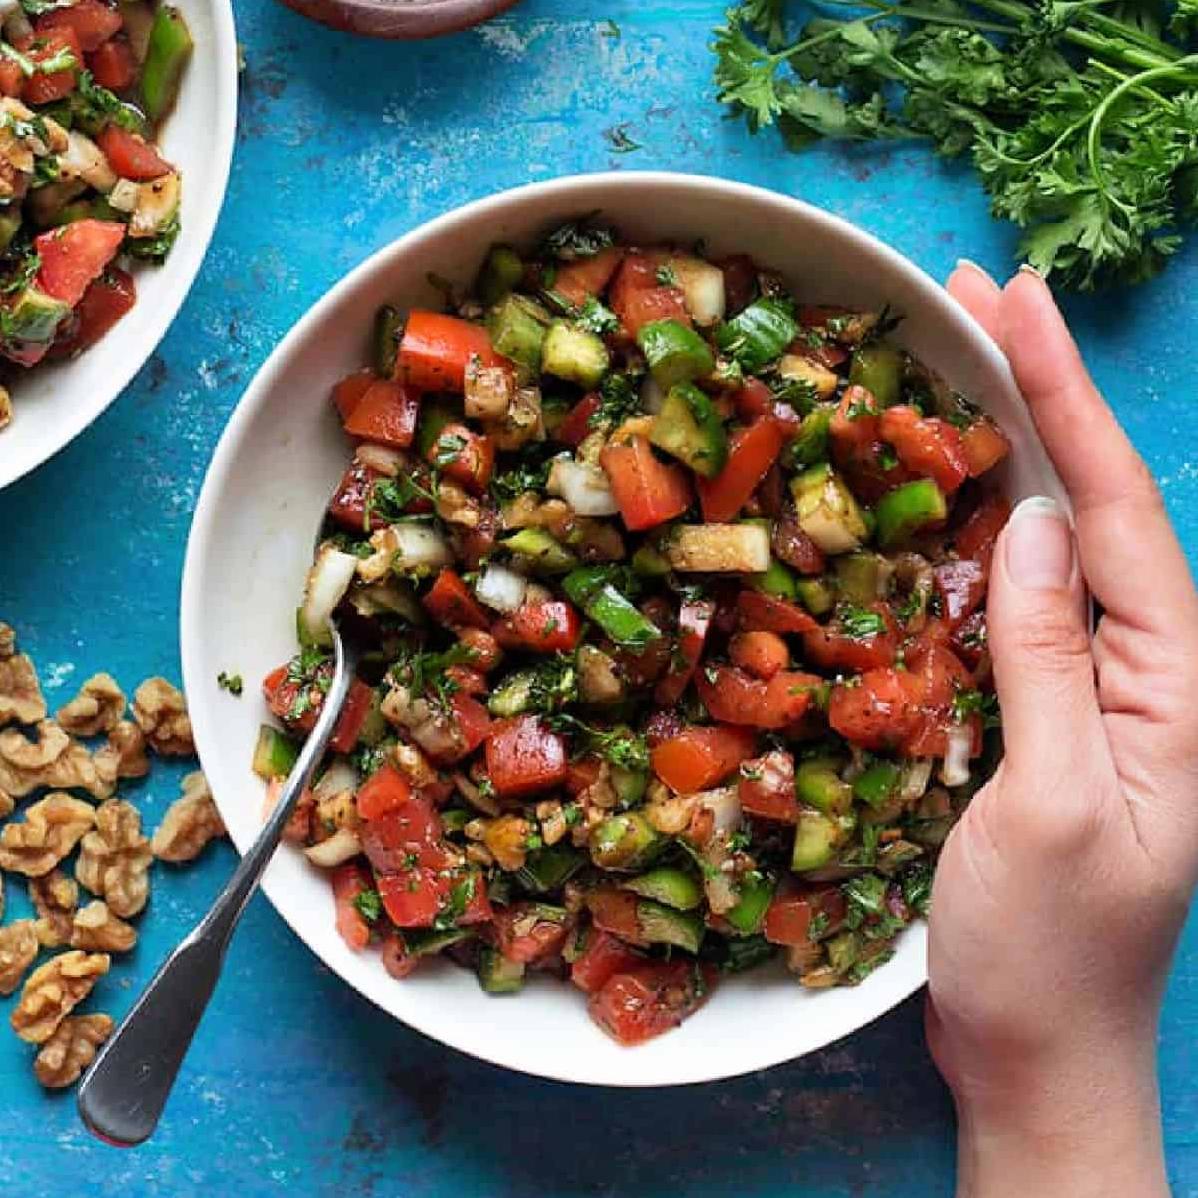  Take your taste buds on a trip to Turkey with every forkful of this salad.